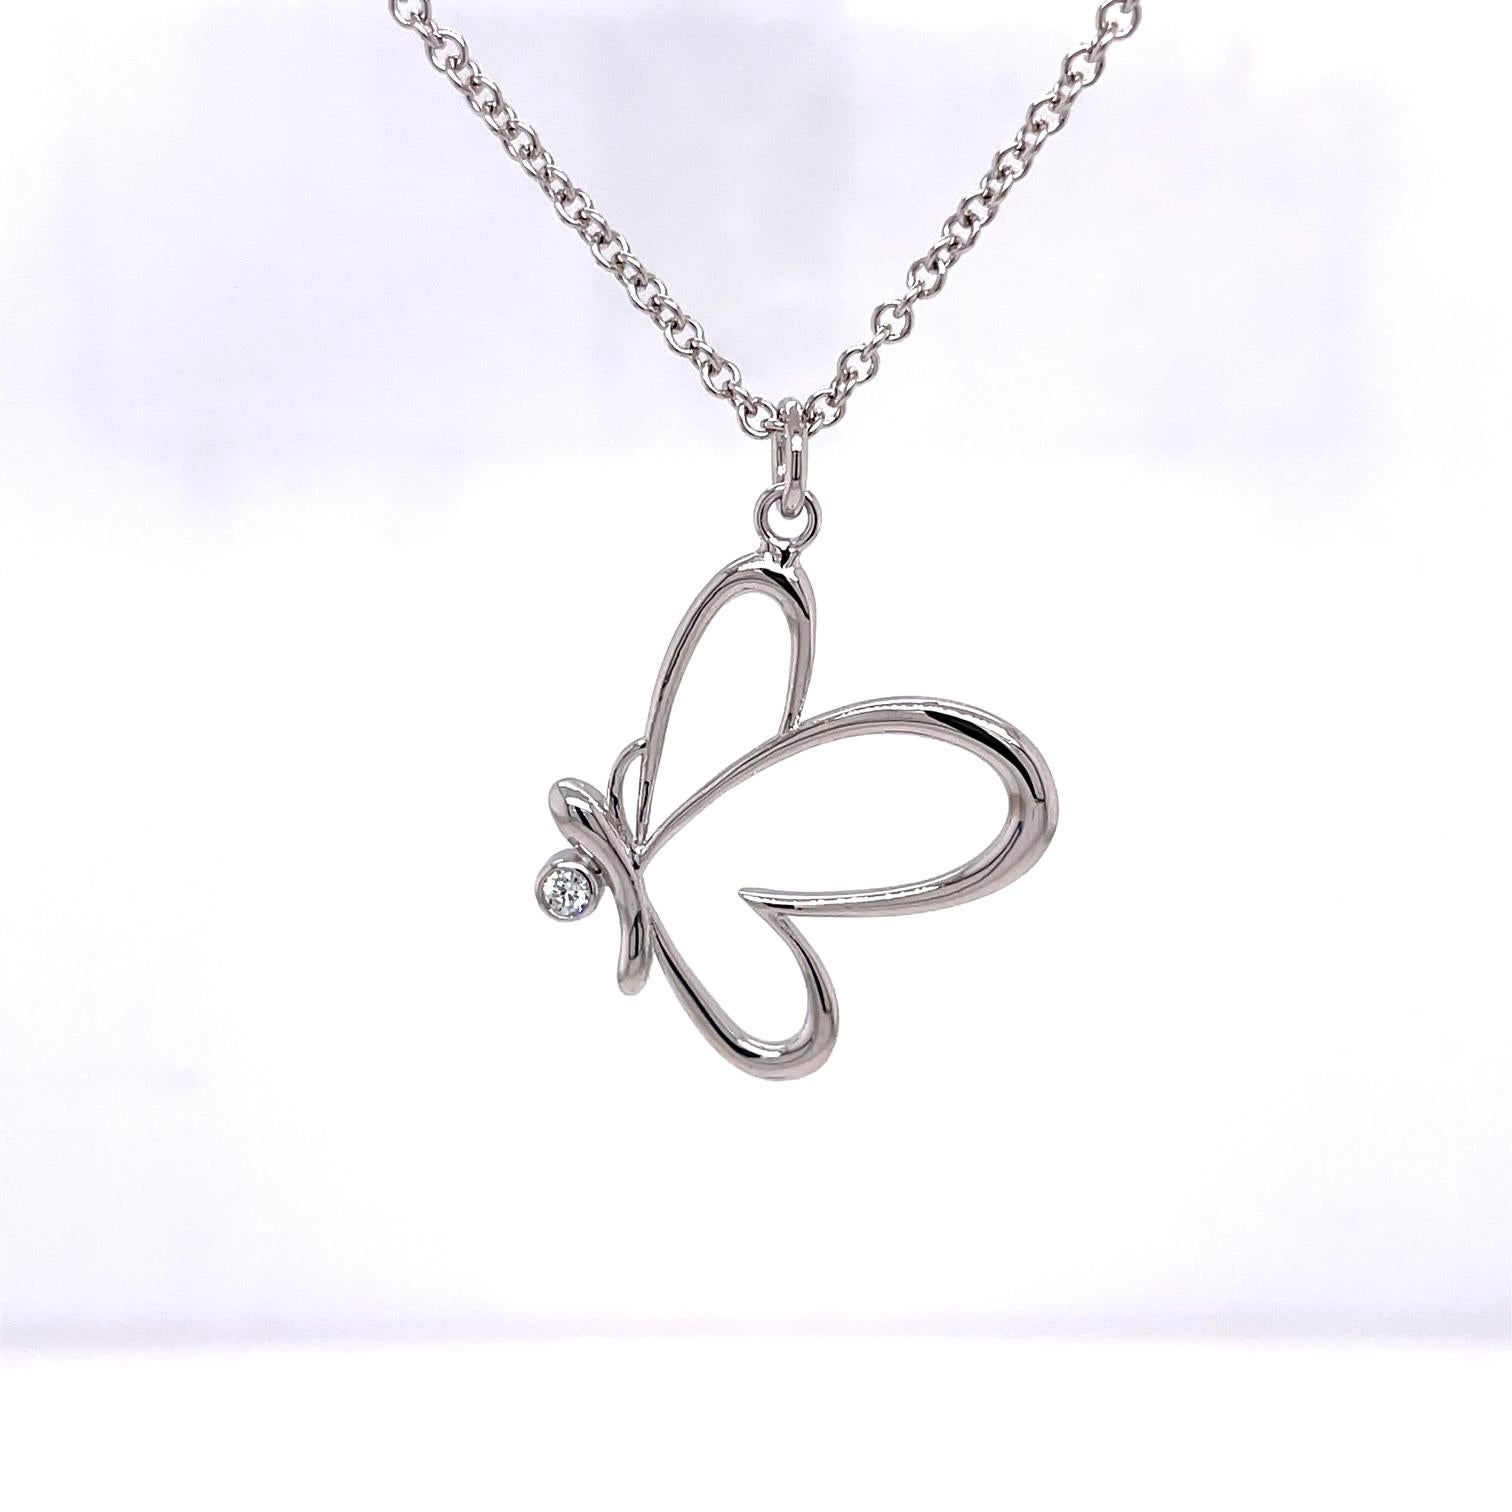 An 18k white gold butterfly pendant with one 2.5mm round white diamond, .05 carats. On an 18 inch 2mm 14k white gold cable chain. This necklace was made and designed by llyn strong.